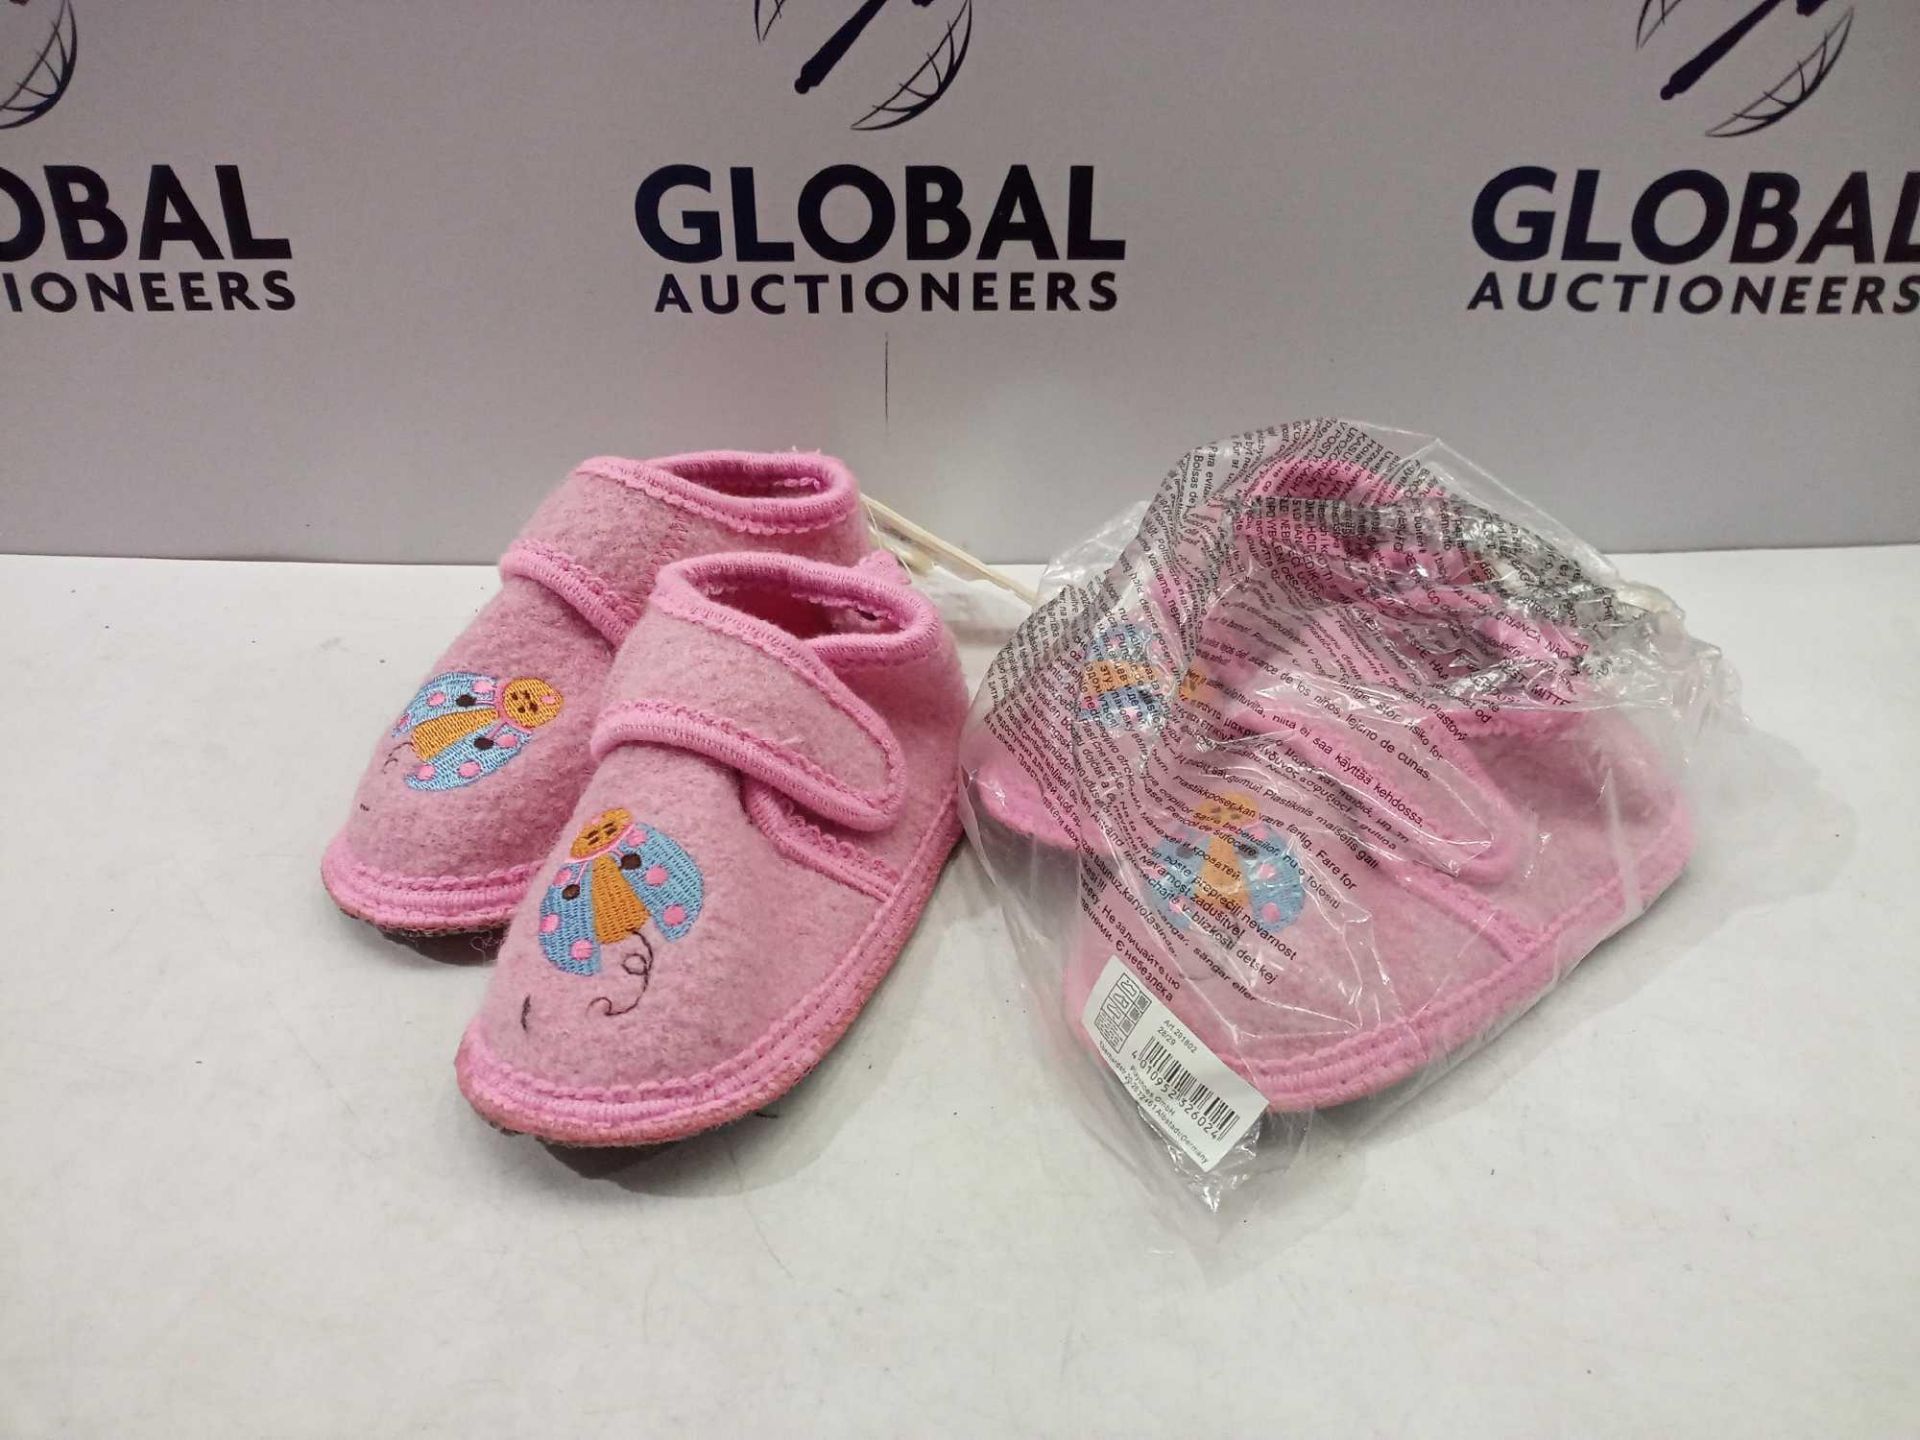 Combined Rrp £300 Locked To Contain Approximately 30 Pairs Of Pink Ladybug Design Children'S Slip-On